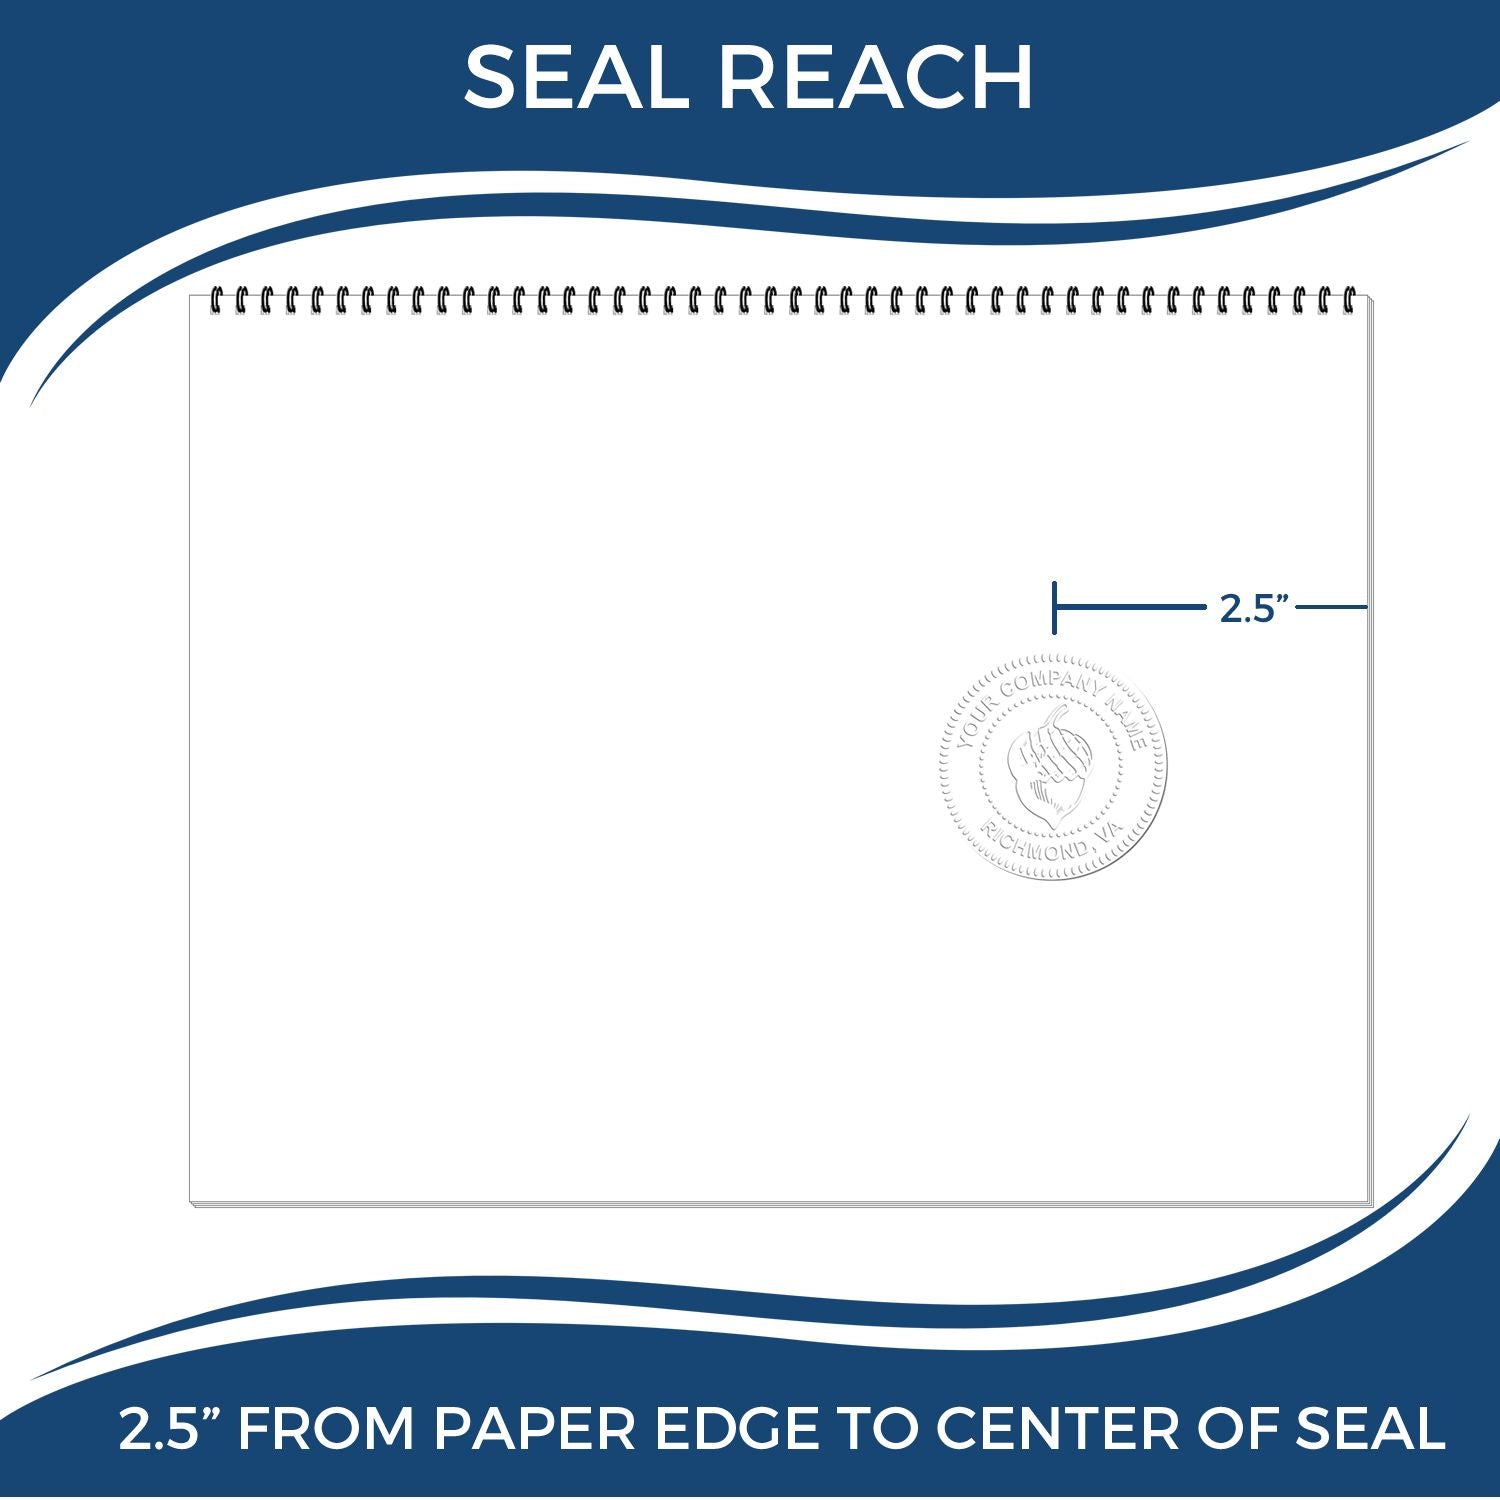 An infographic showing the seal reach which is represented by a ruler and a miniature seal image of the State of Colorado Long Reach Architectural Embossing Seal